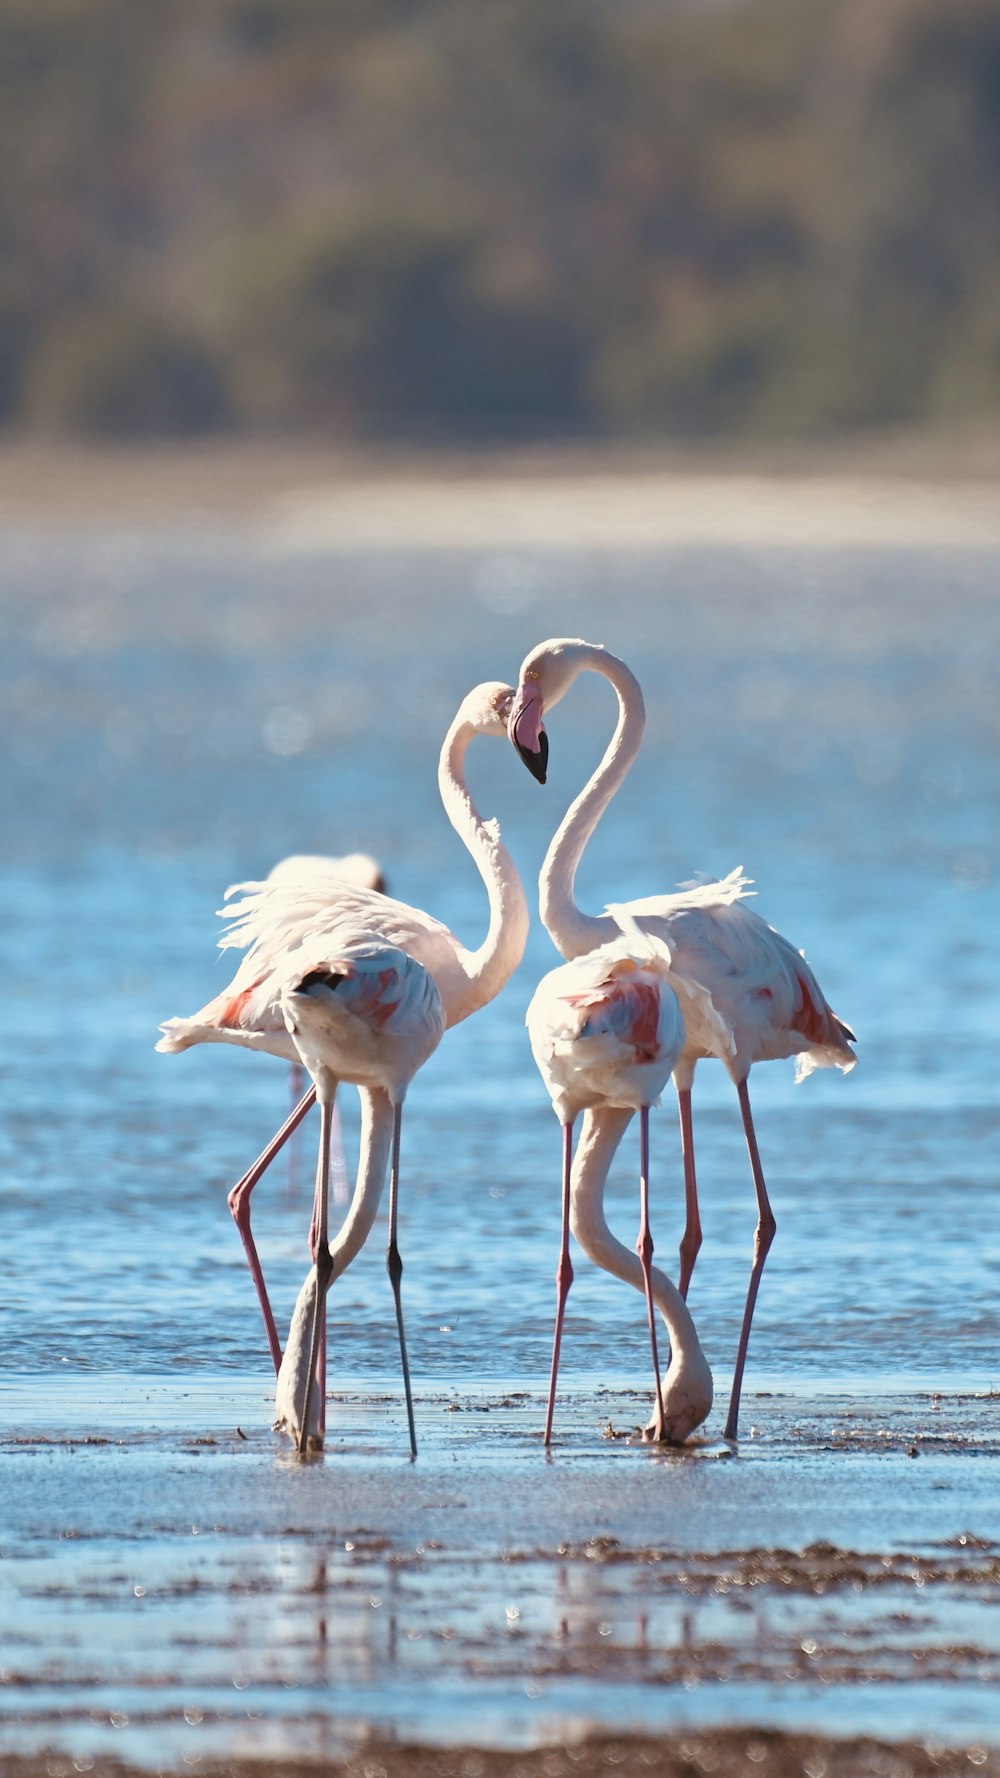 a group of flamingos standing in water